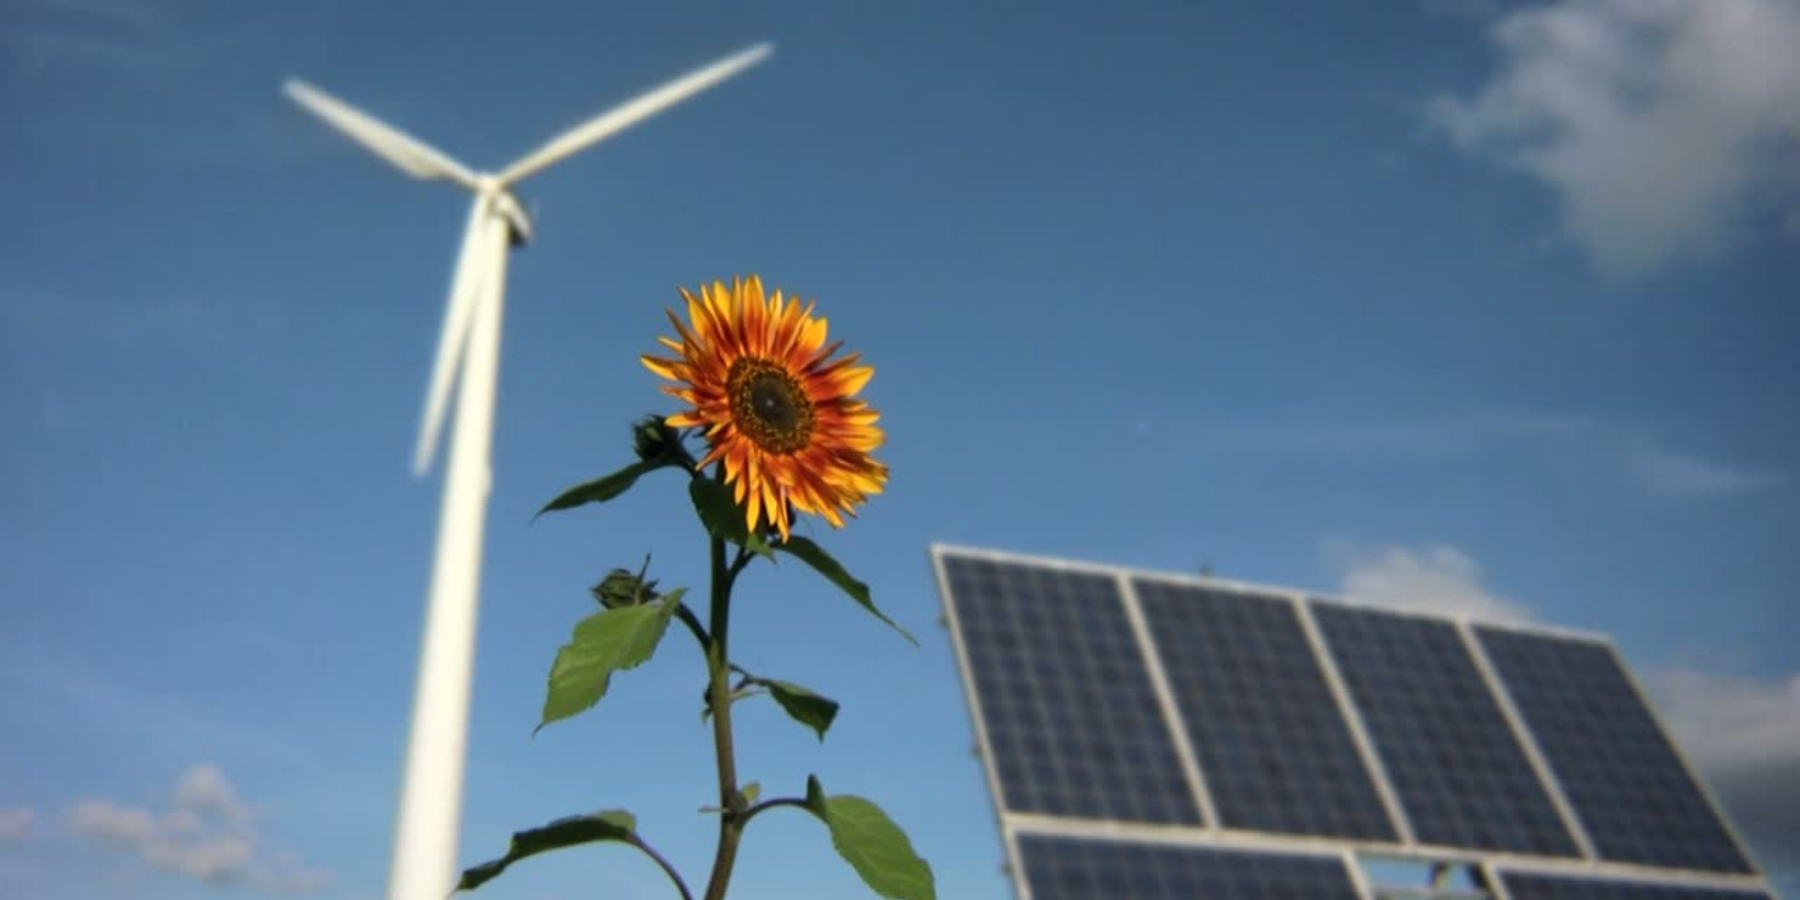 A wind turbine, sunflower and solar panel are in front of a blue sky.